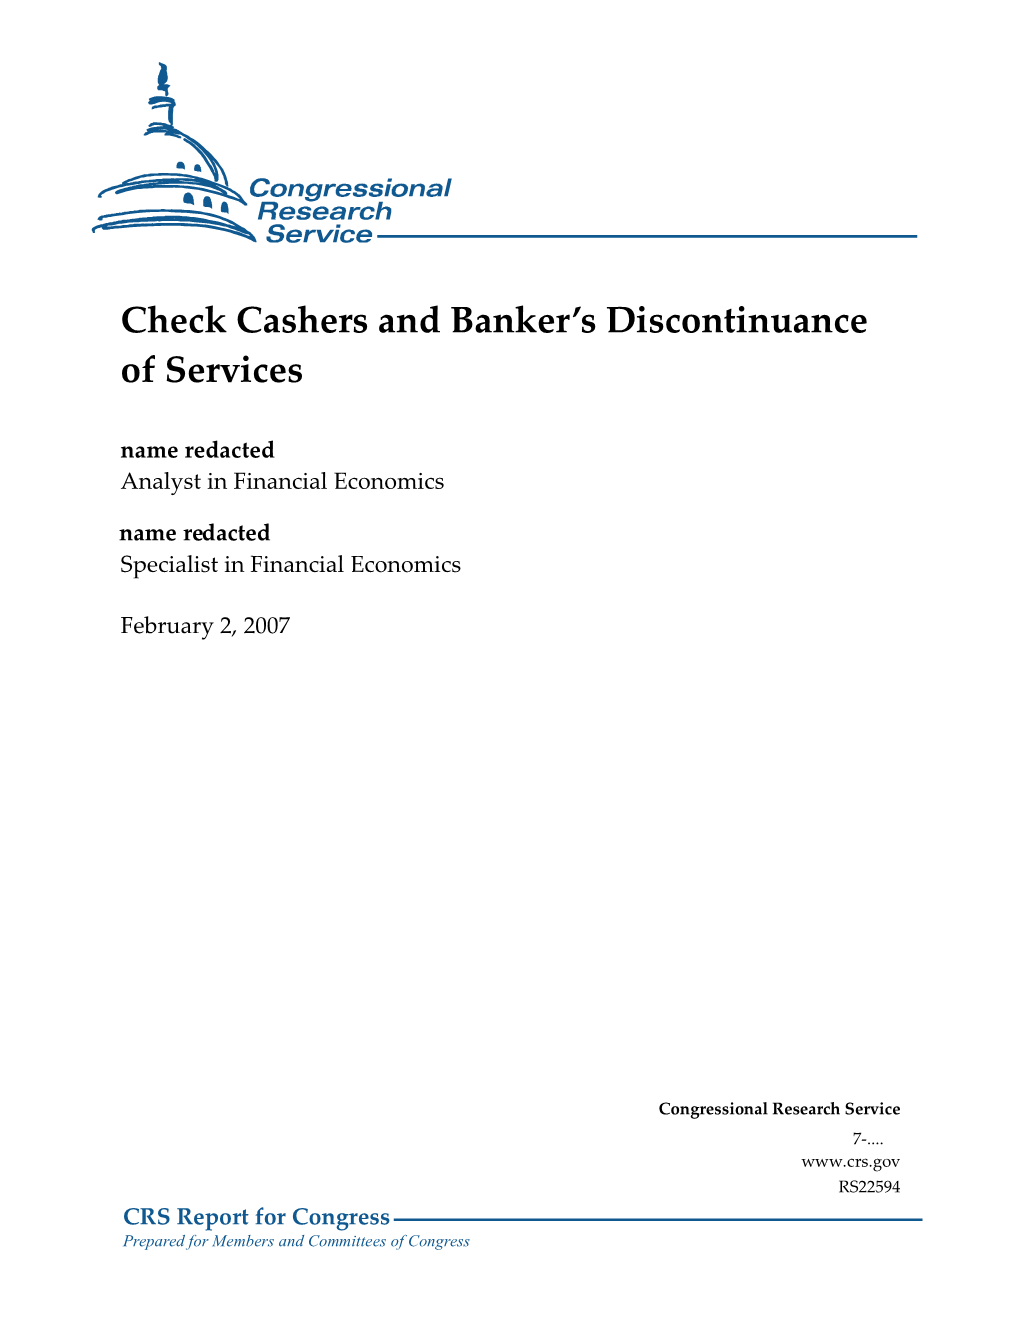 Check Cashers and Banker's Discontinuance of Services